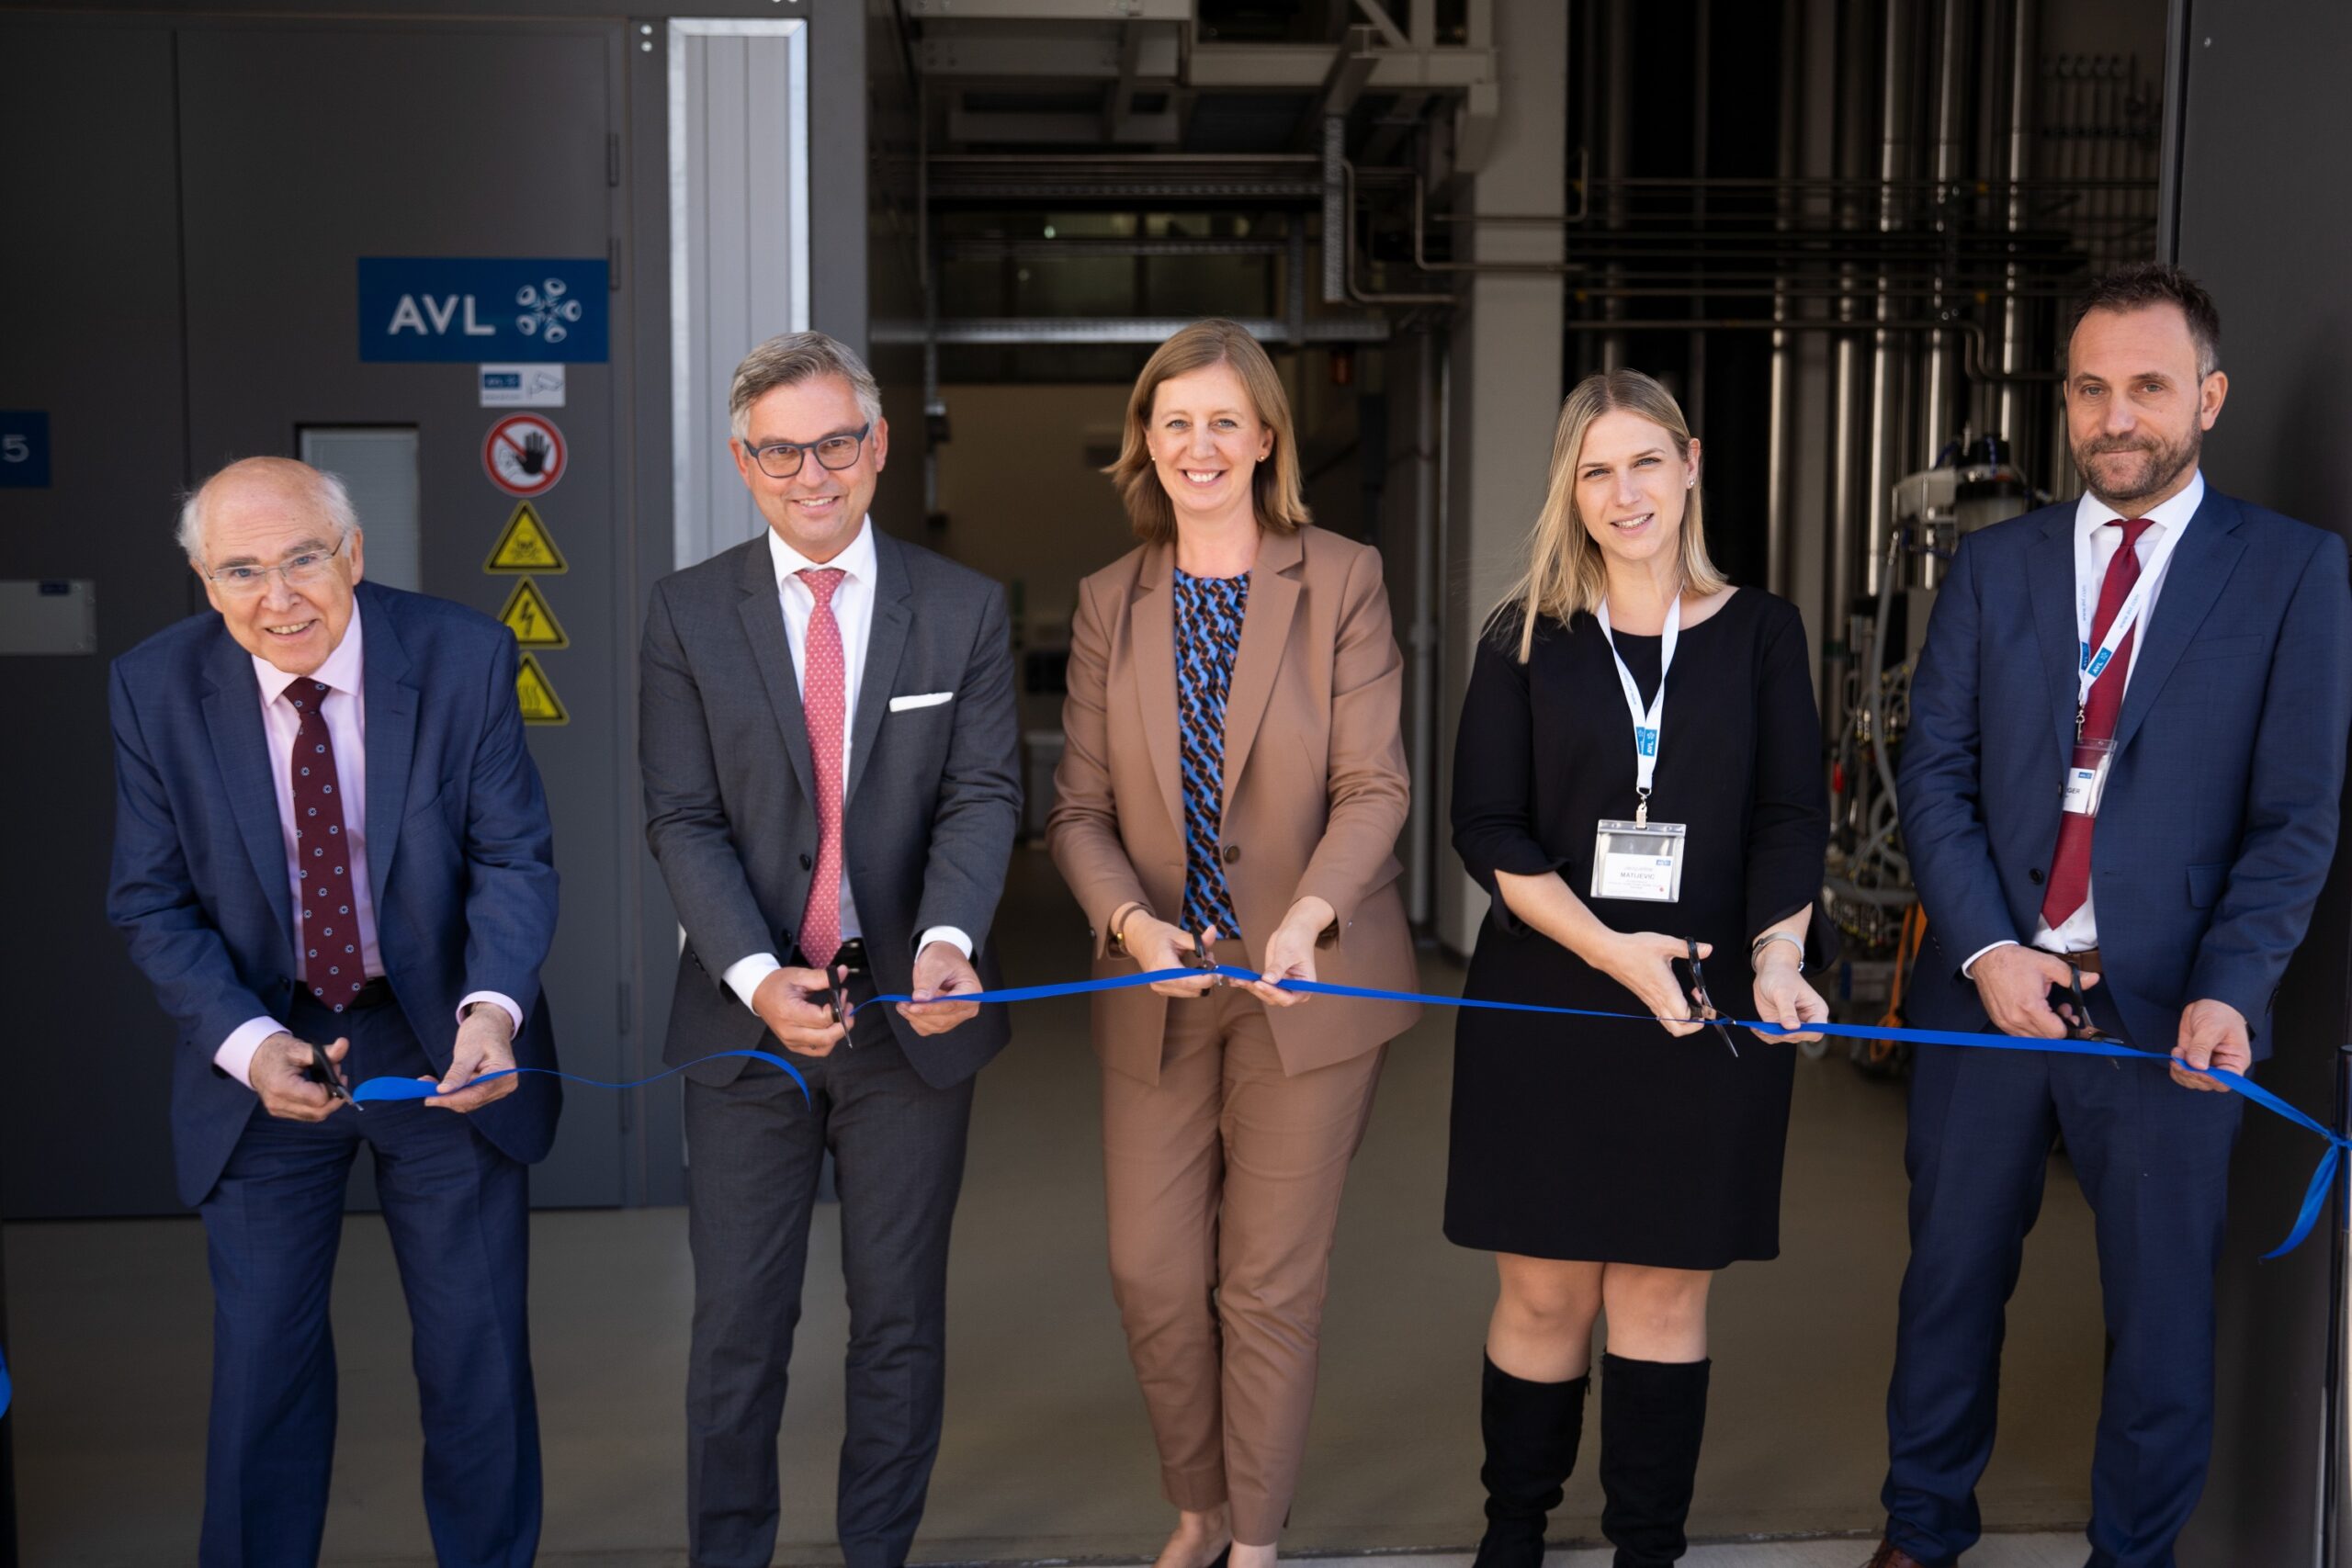 Austrian mobility technology company AVL expands its global test infrastructure for fuel cell and hydrogen technology with new state-of-the-art test center in Graz, Austria